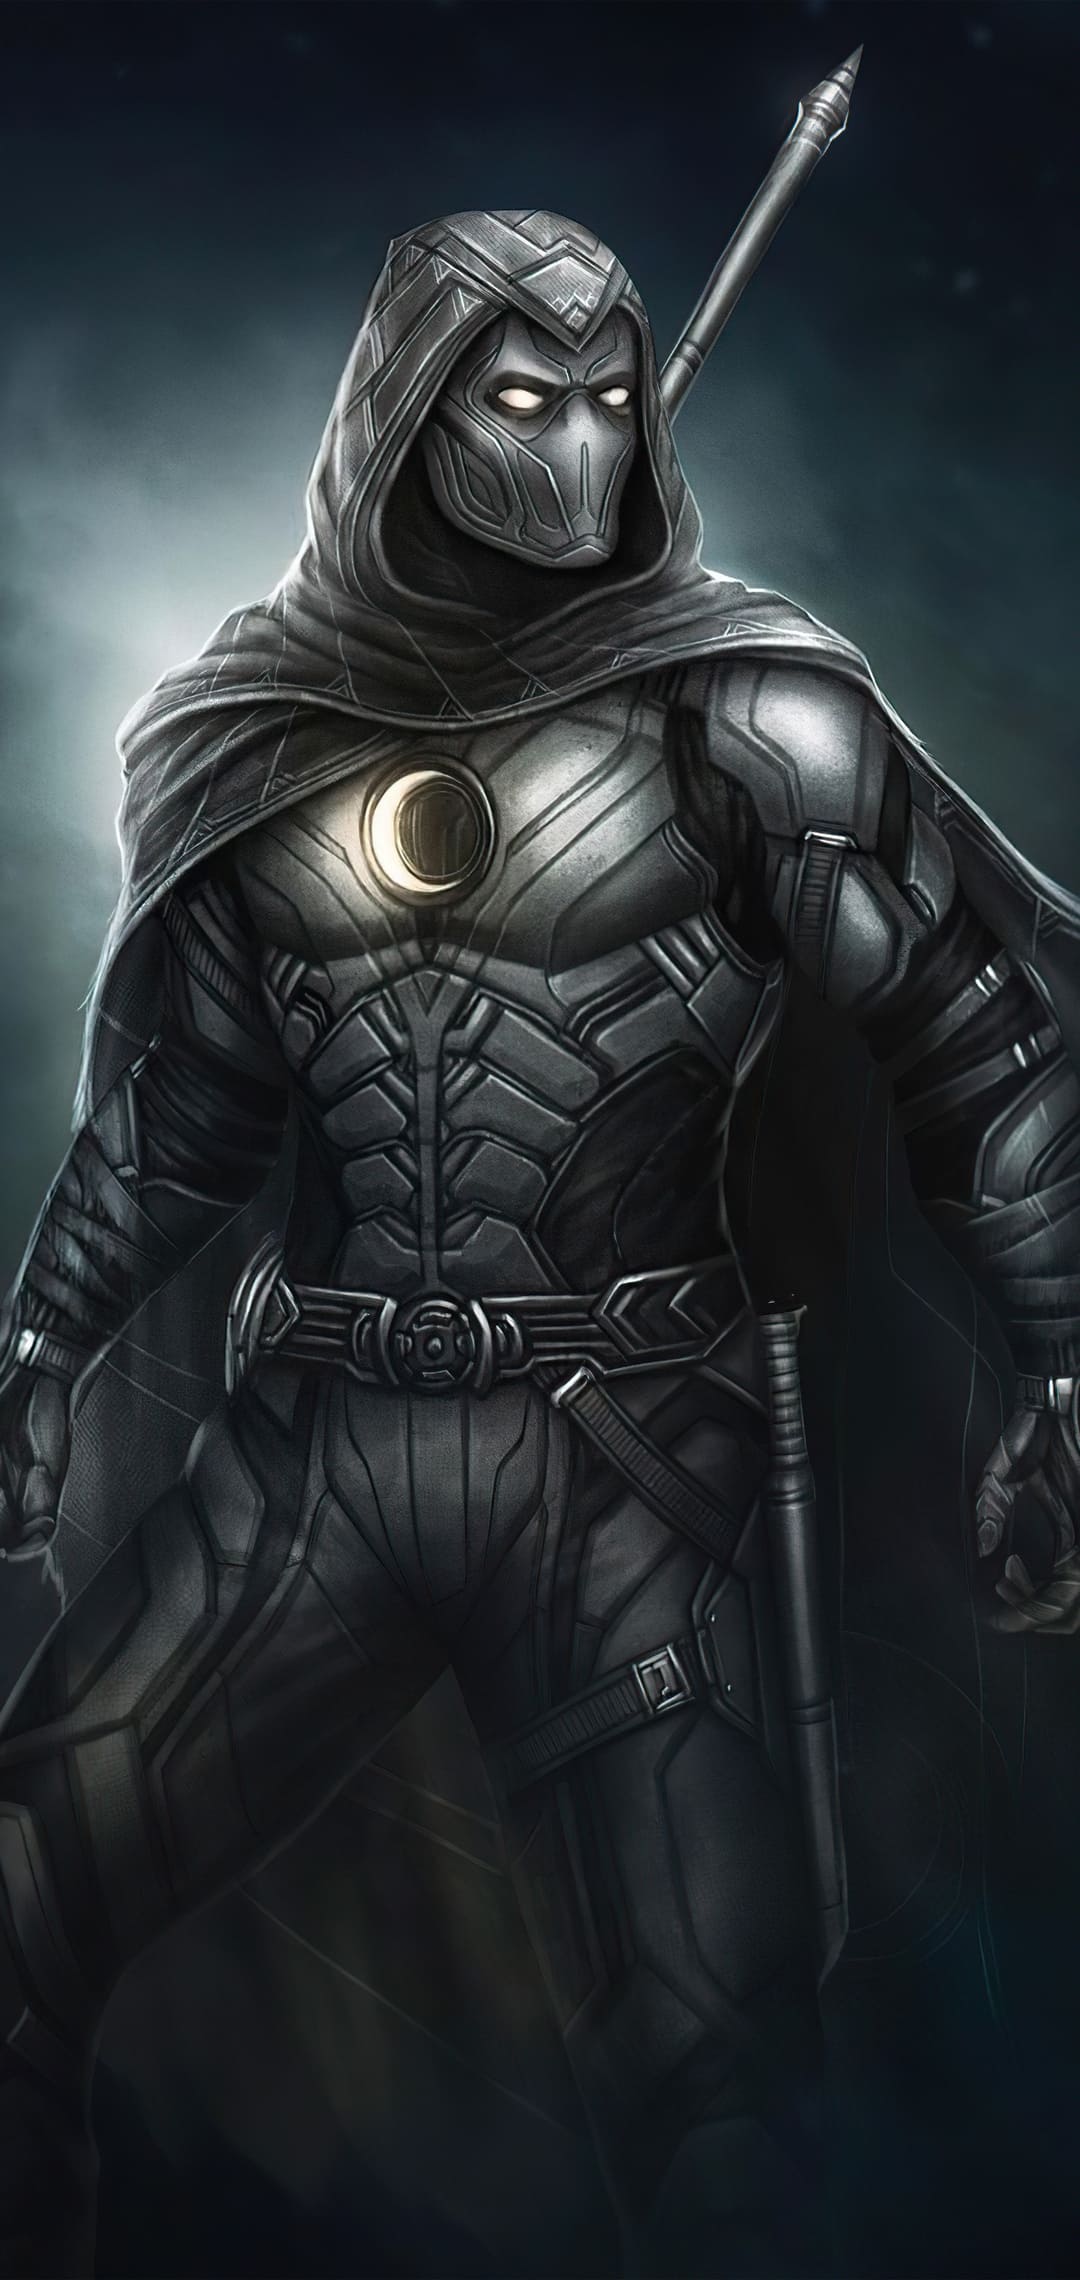 Moon knight home screen marvel superhero for android mobile phone